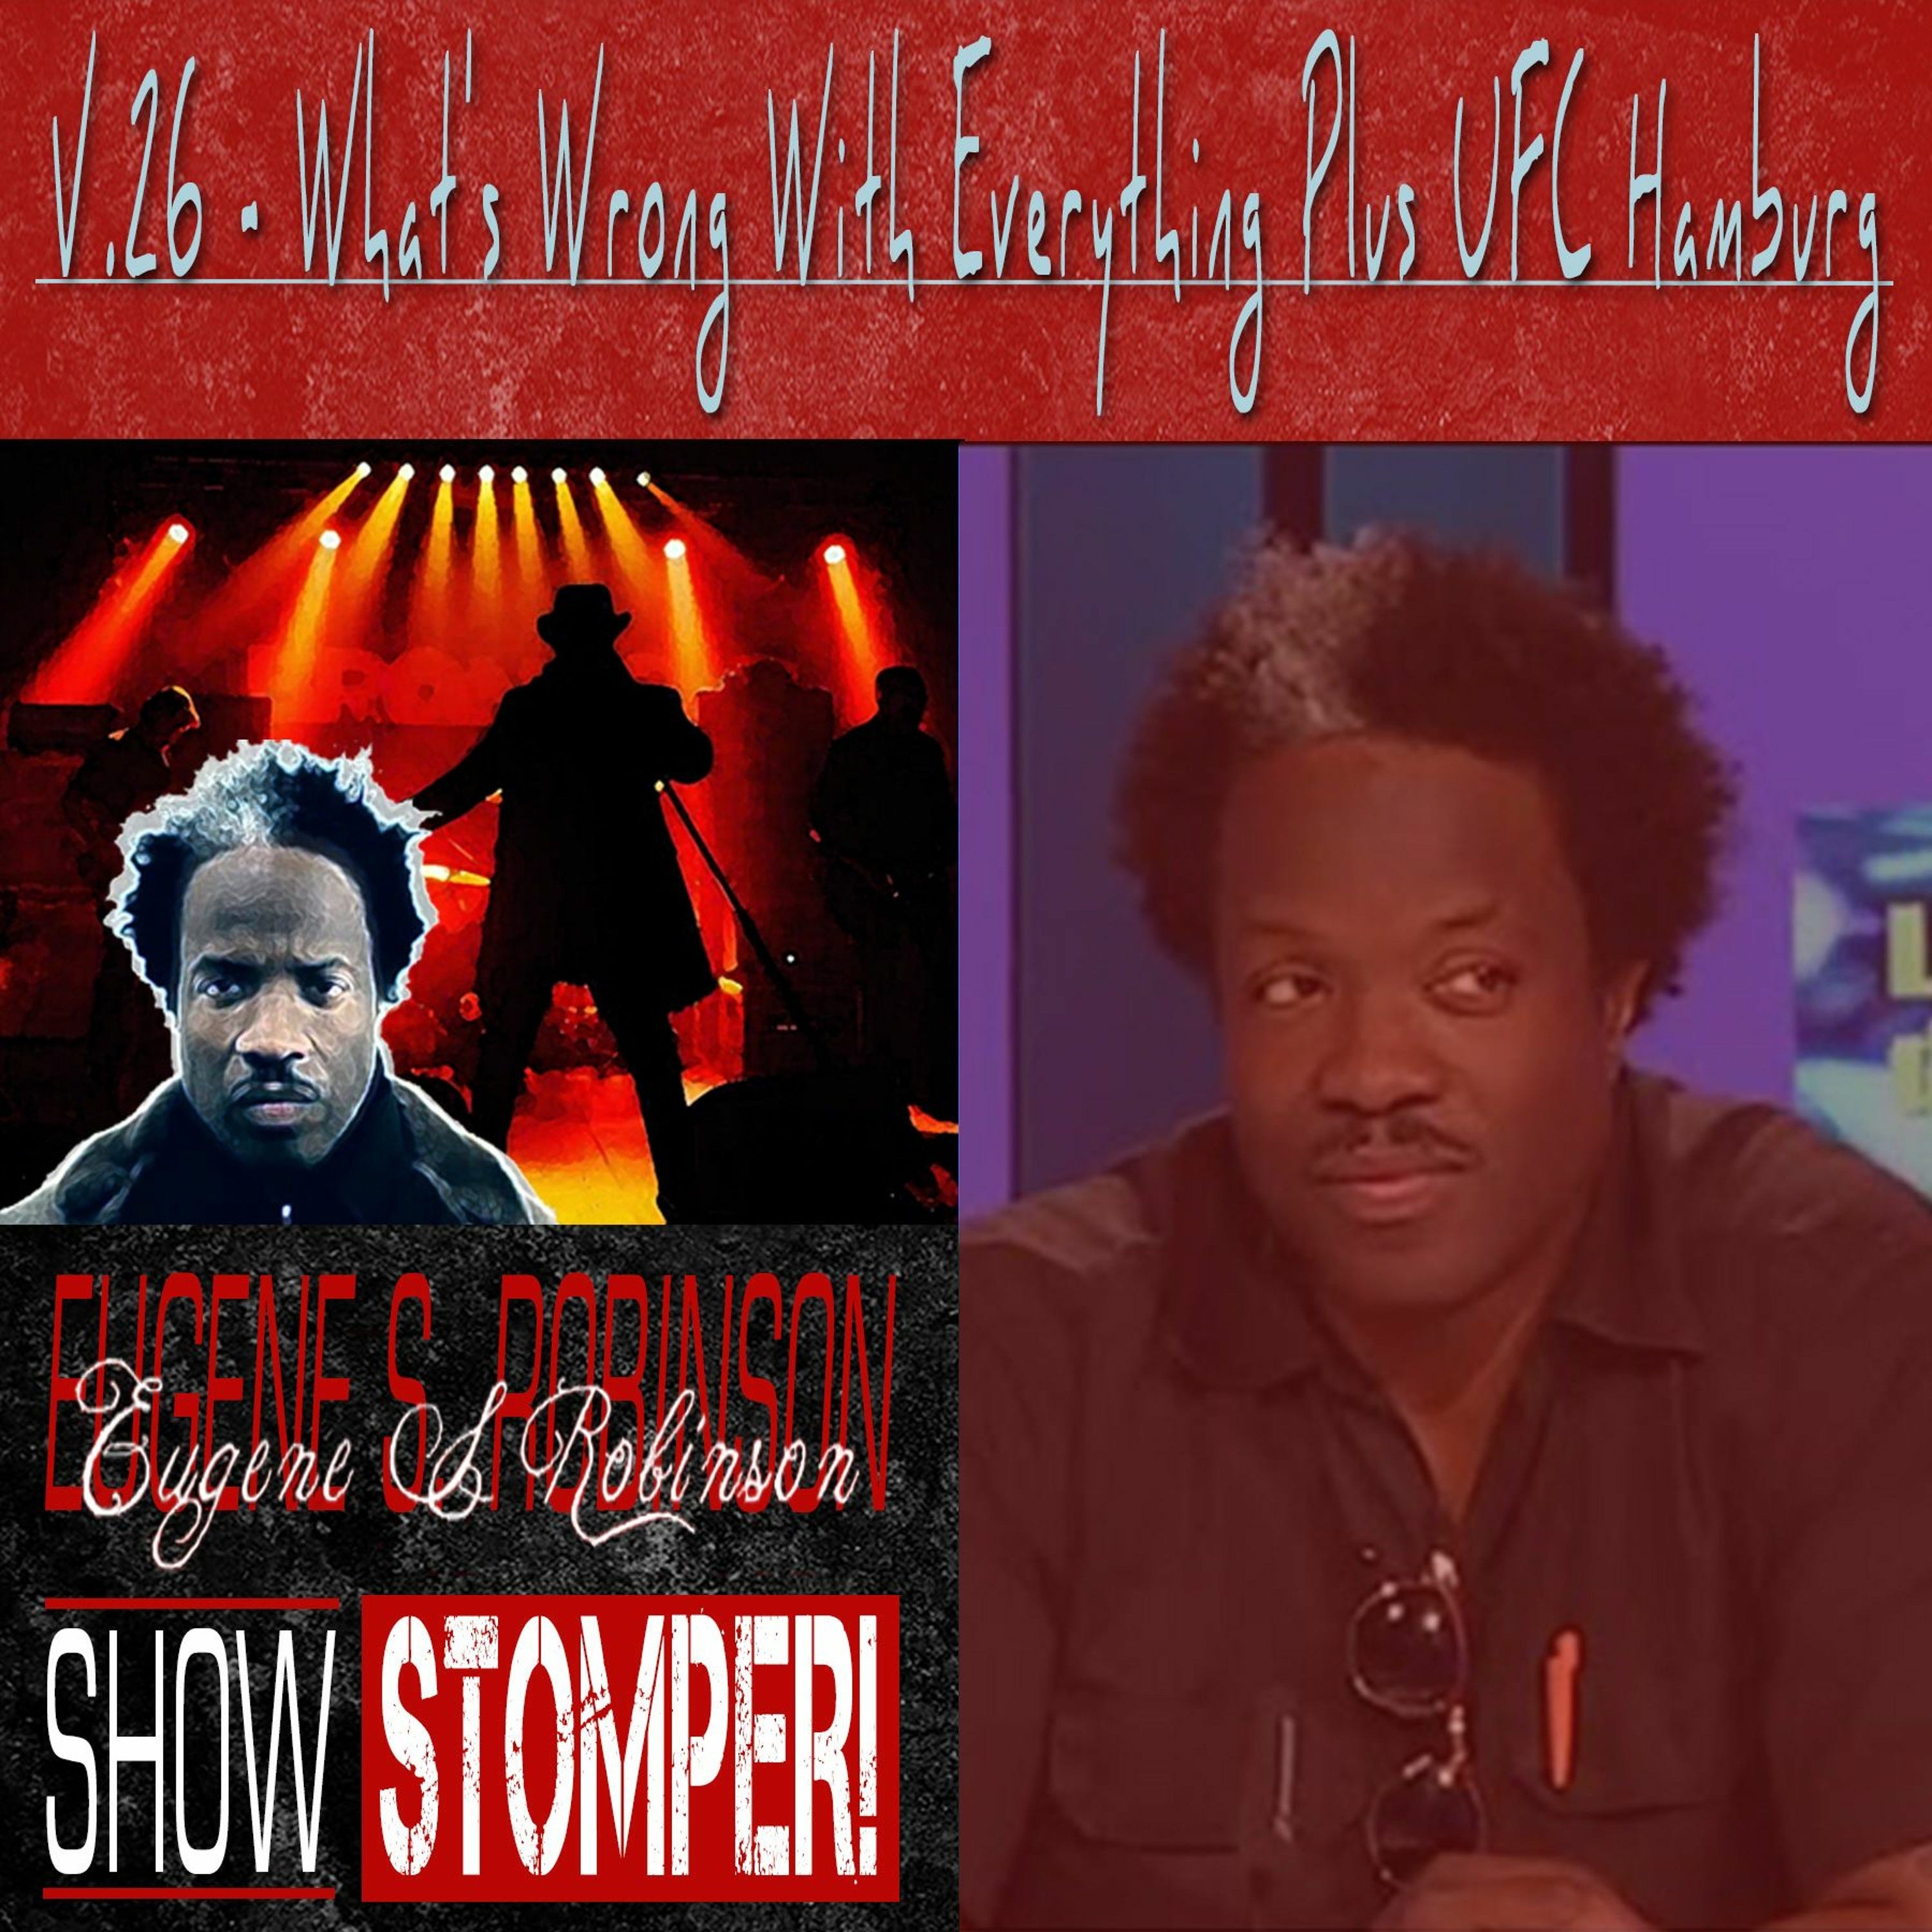 The Eugene S. Robinson Show Stomper! V.26 - What's Wrong With Everything Plus UFC Hamburg